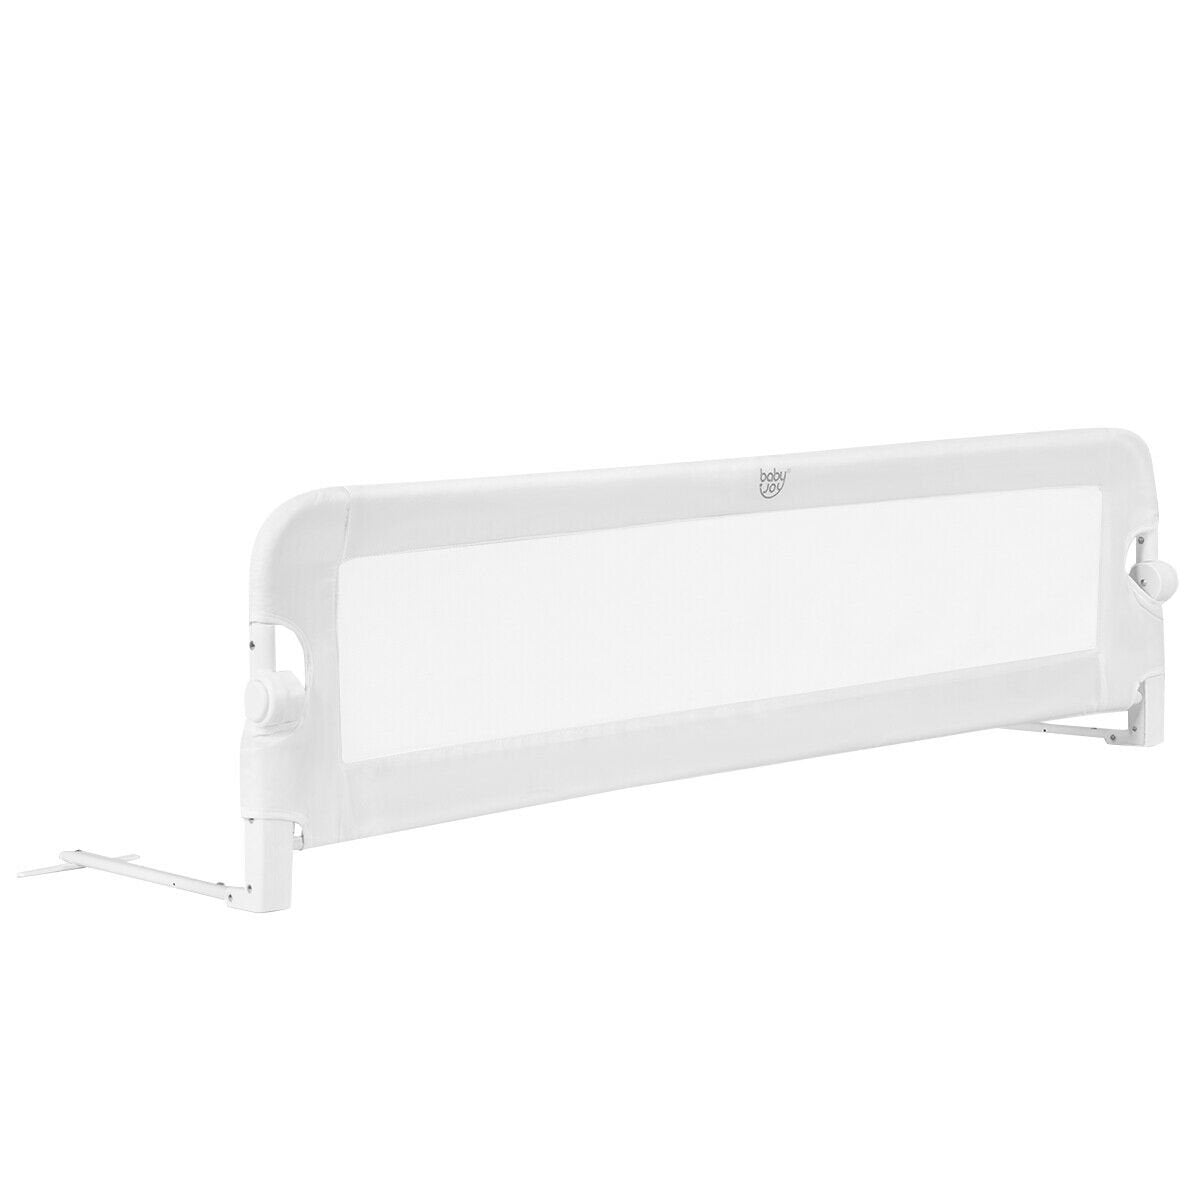 59-Inch Extra Long Bed Rail Guard, White